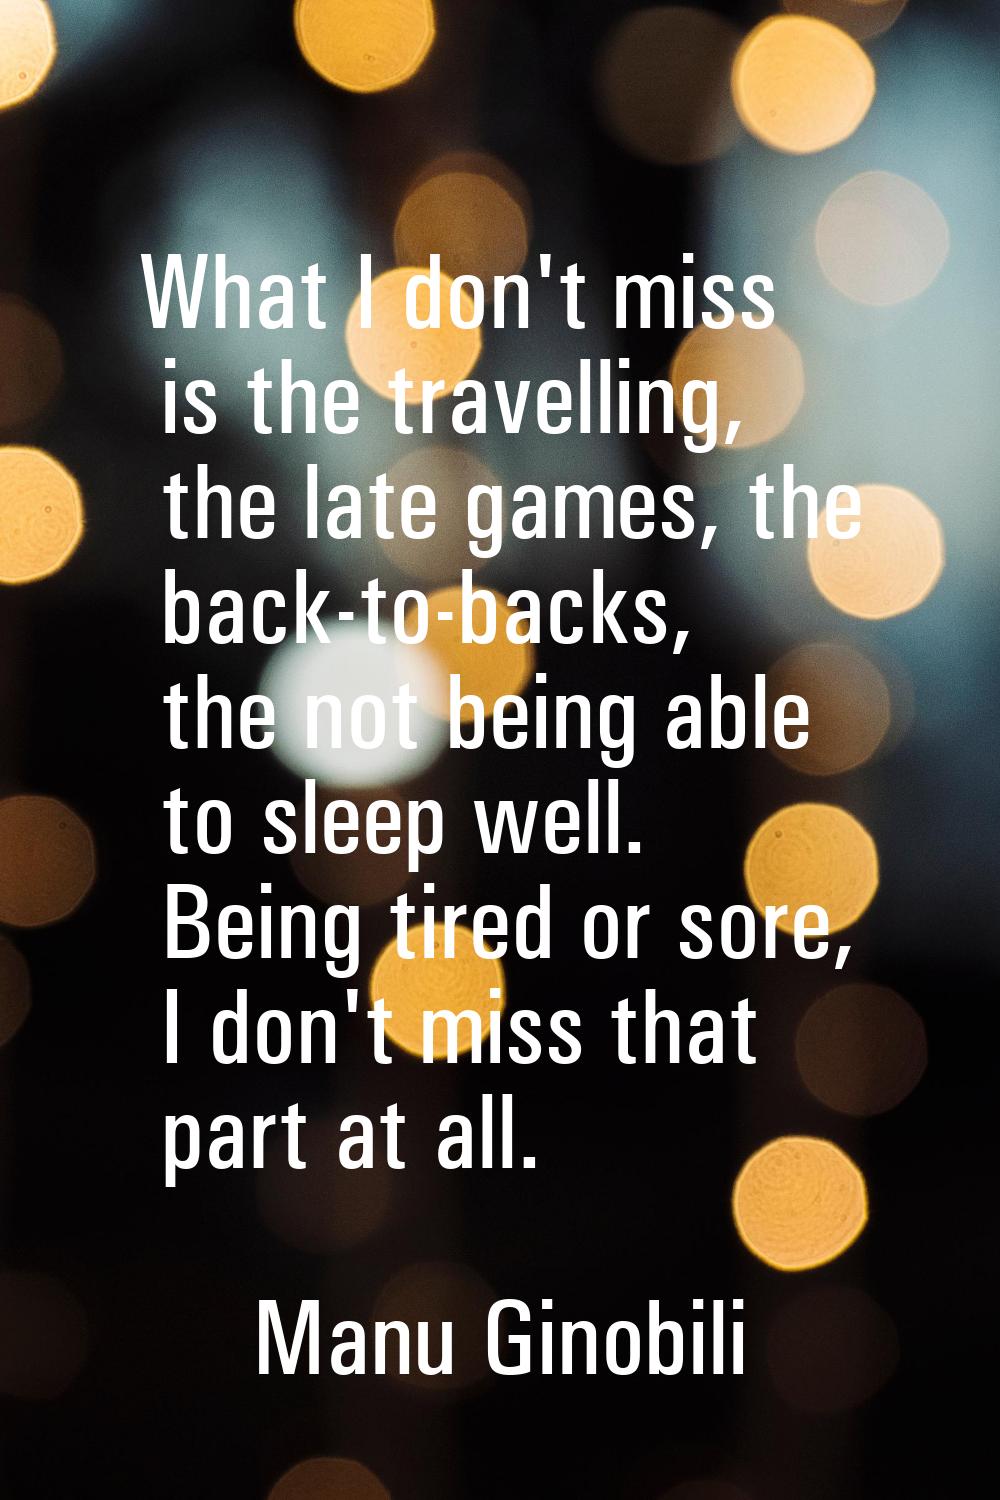 What I don't miss is the travelling, the late games, the back-to-backs, the not being able to sleep